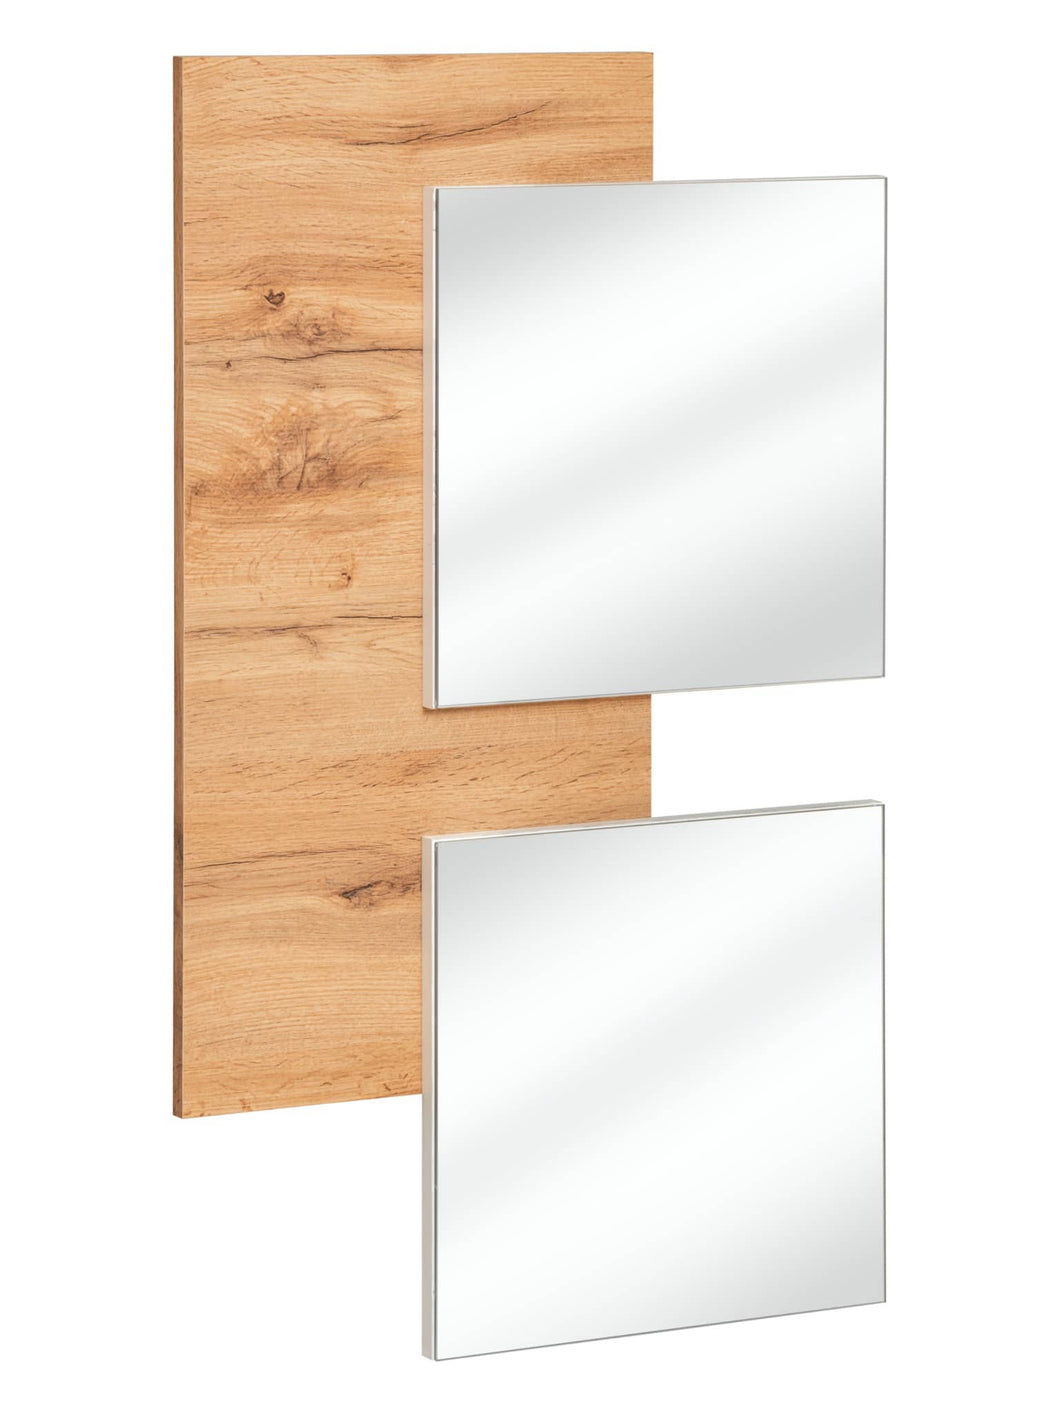 Easy EY-01 Hallway Mirror Arte-N WTW EY TYP 01 Our sleek wall mounted wooden panel with two mirrors is perfect for giving that final finishing touch to your interior design scheme. Made to be hung either vertically or horizontally, the EY-01 not only looks gorgeous but also serves as a great way to primp your look before leaving the house. W60cm x H100cm x D4cm Colour: Oak Wotan Mirror Matching Furniture Available Made from 16mm high-quality laminated board Assembly Required Weight: 9kg Direct Home Delivery